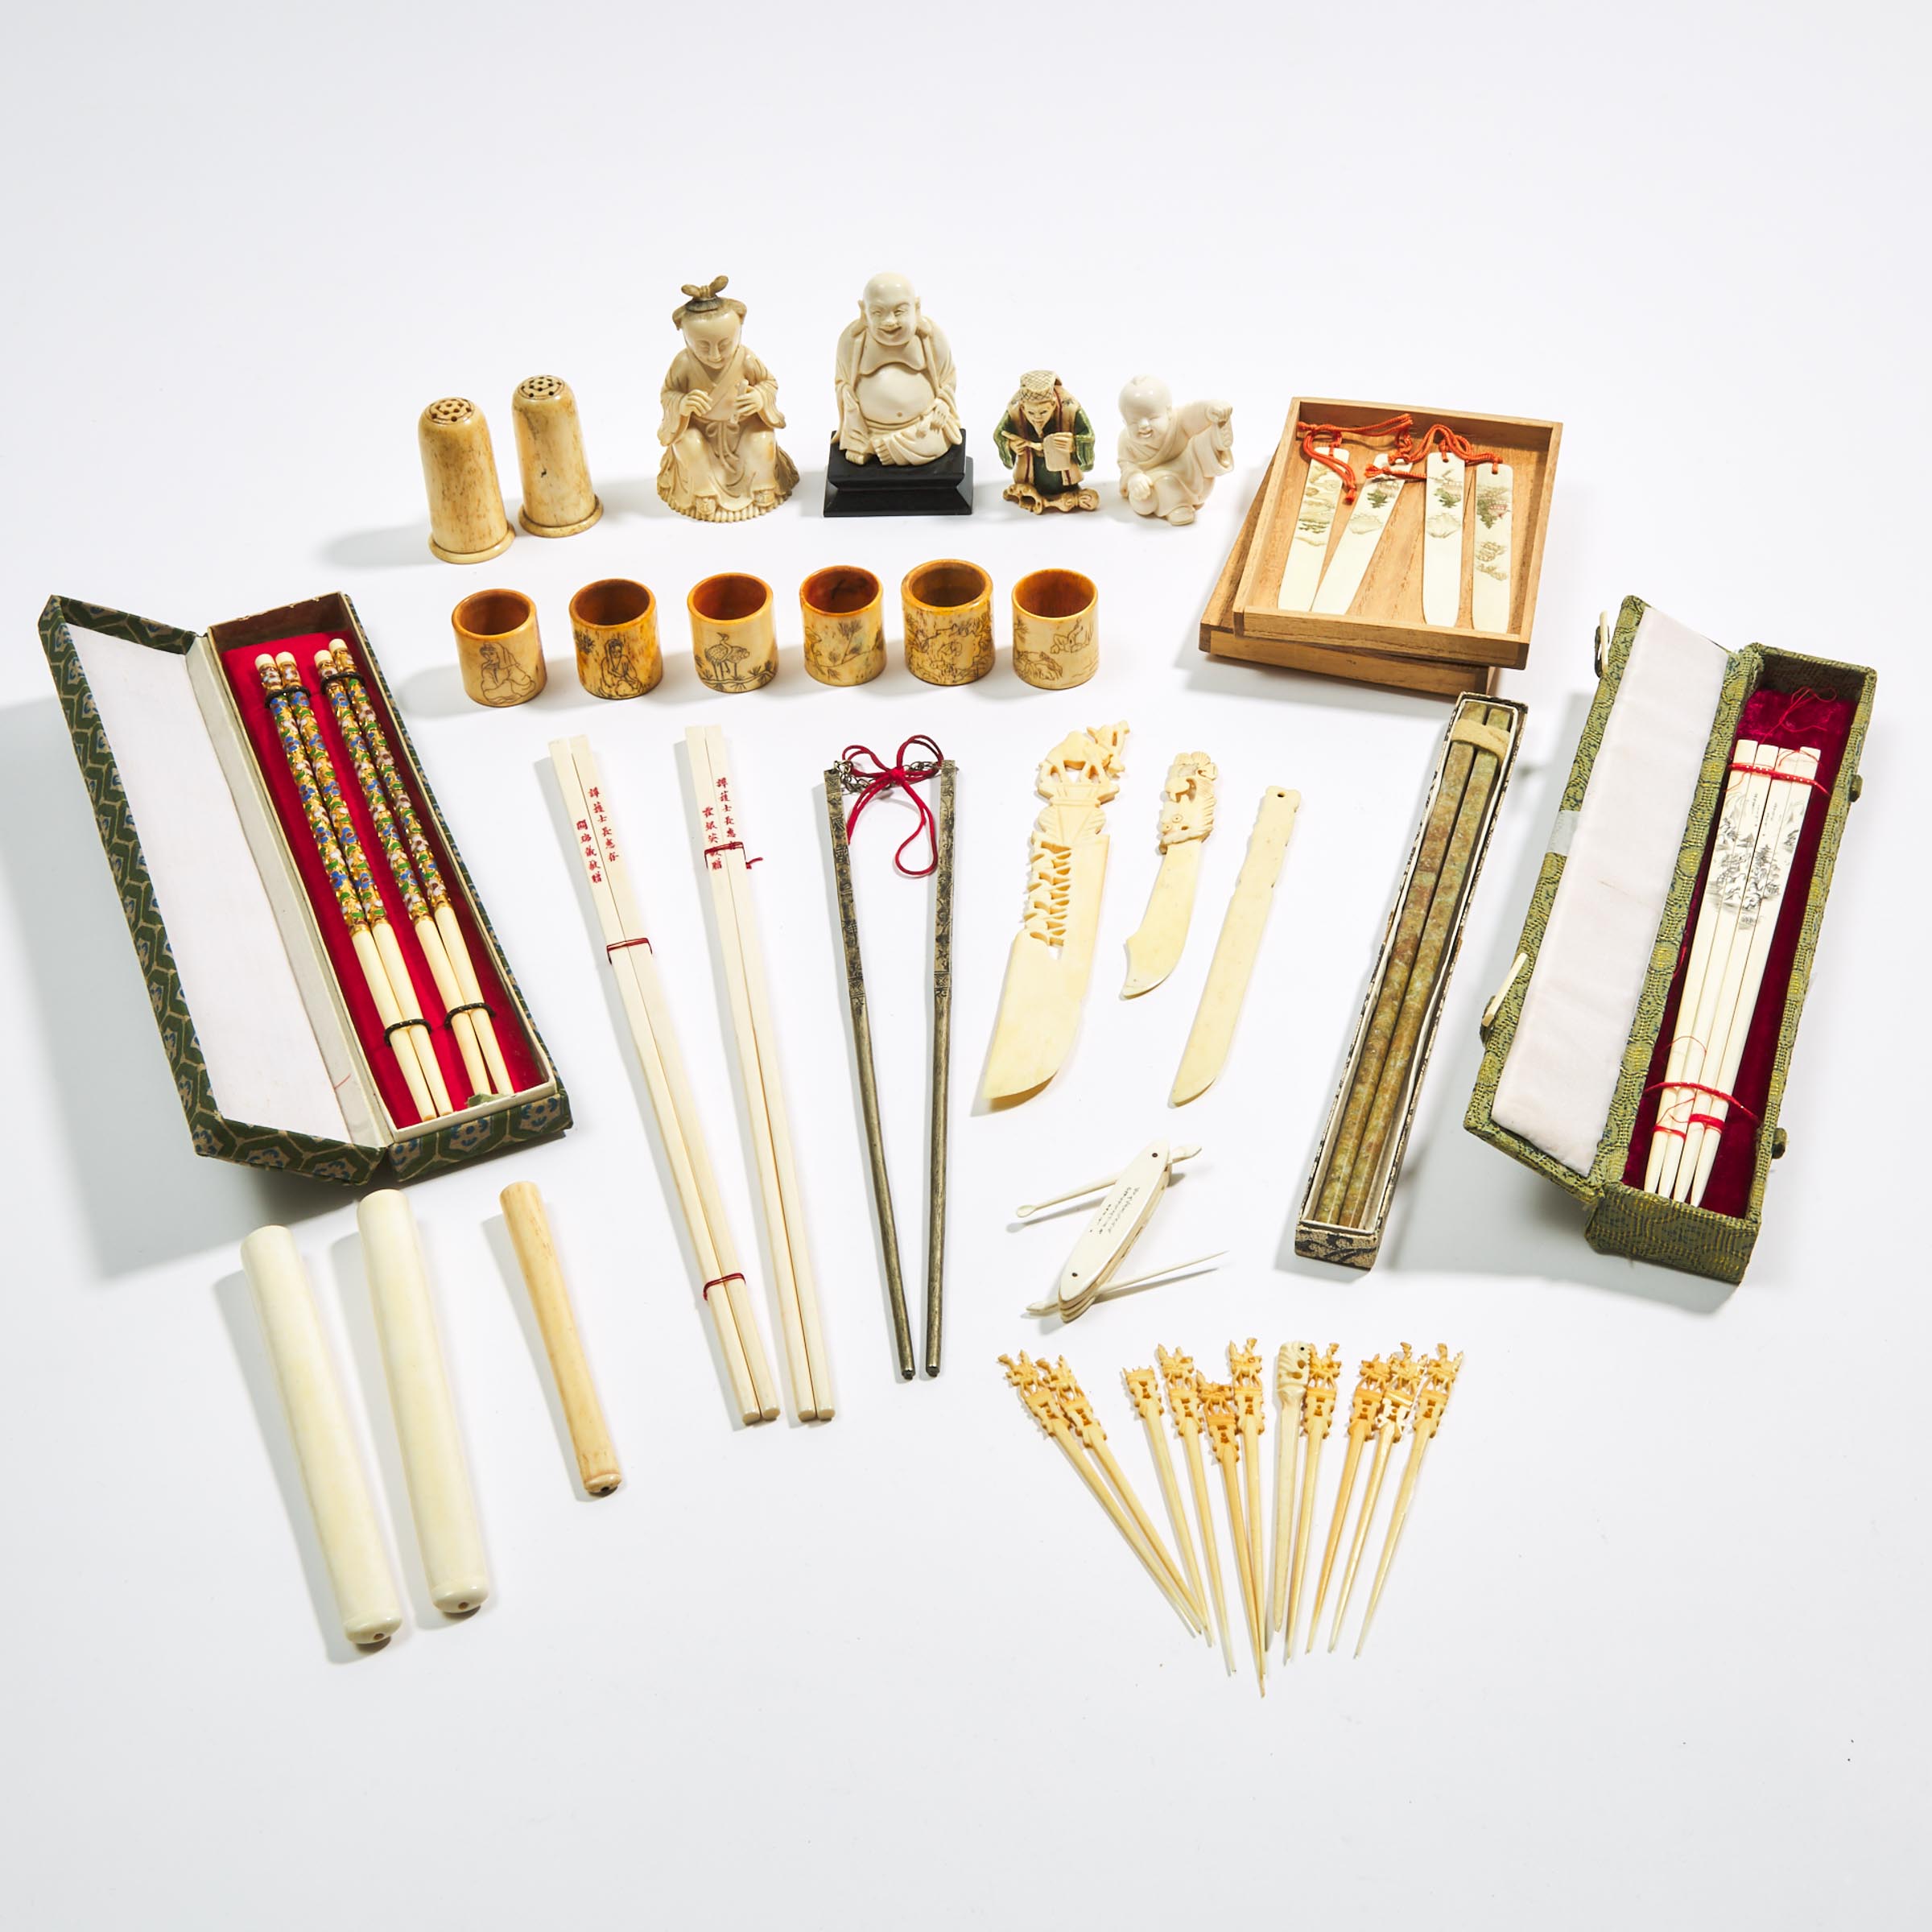 A Group of Thirty-Four Ivory and Bone Carved Objects, together with Eight Pairs of Chopsticks